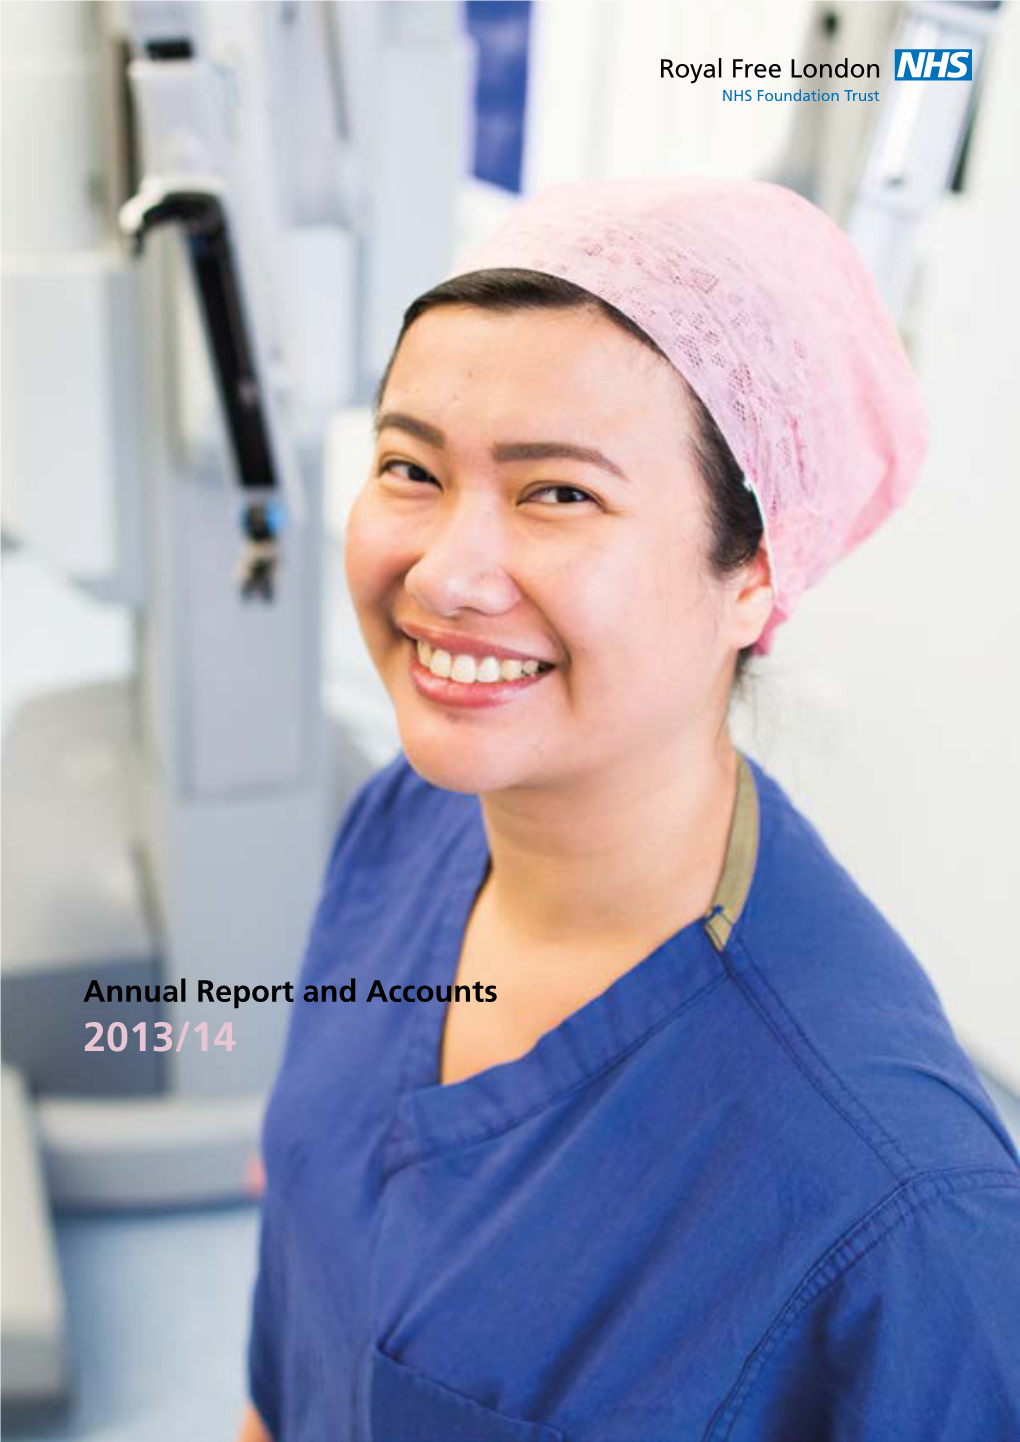 Royal Free London NHS Foundation Trust Annual Report 2013/14